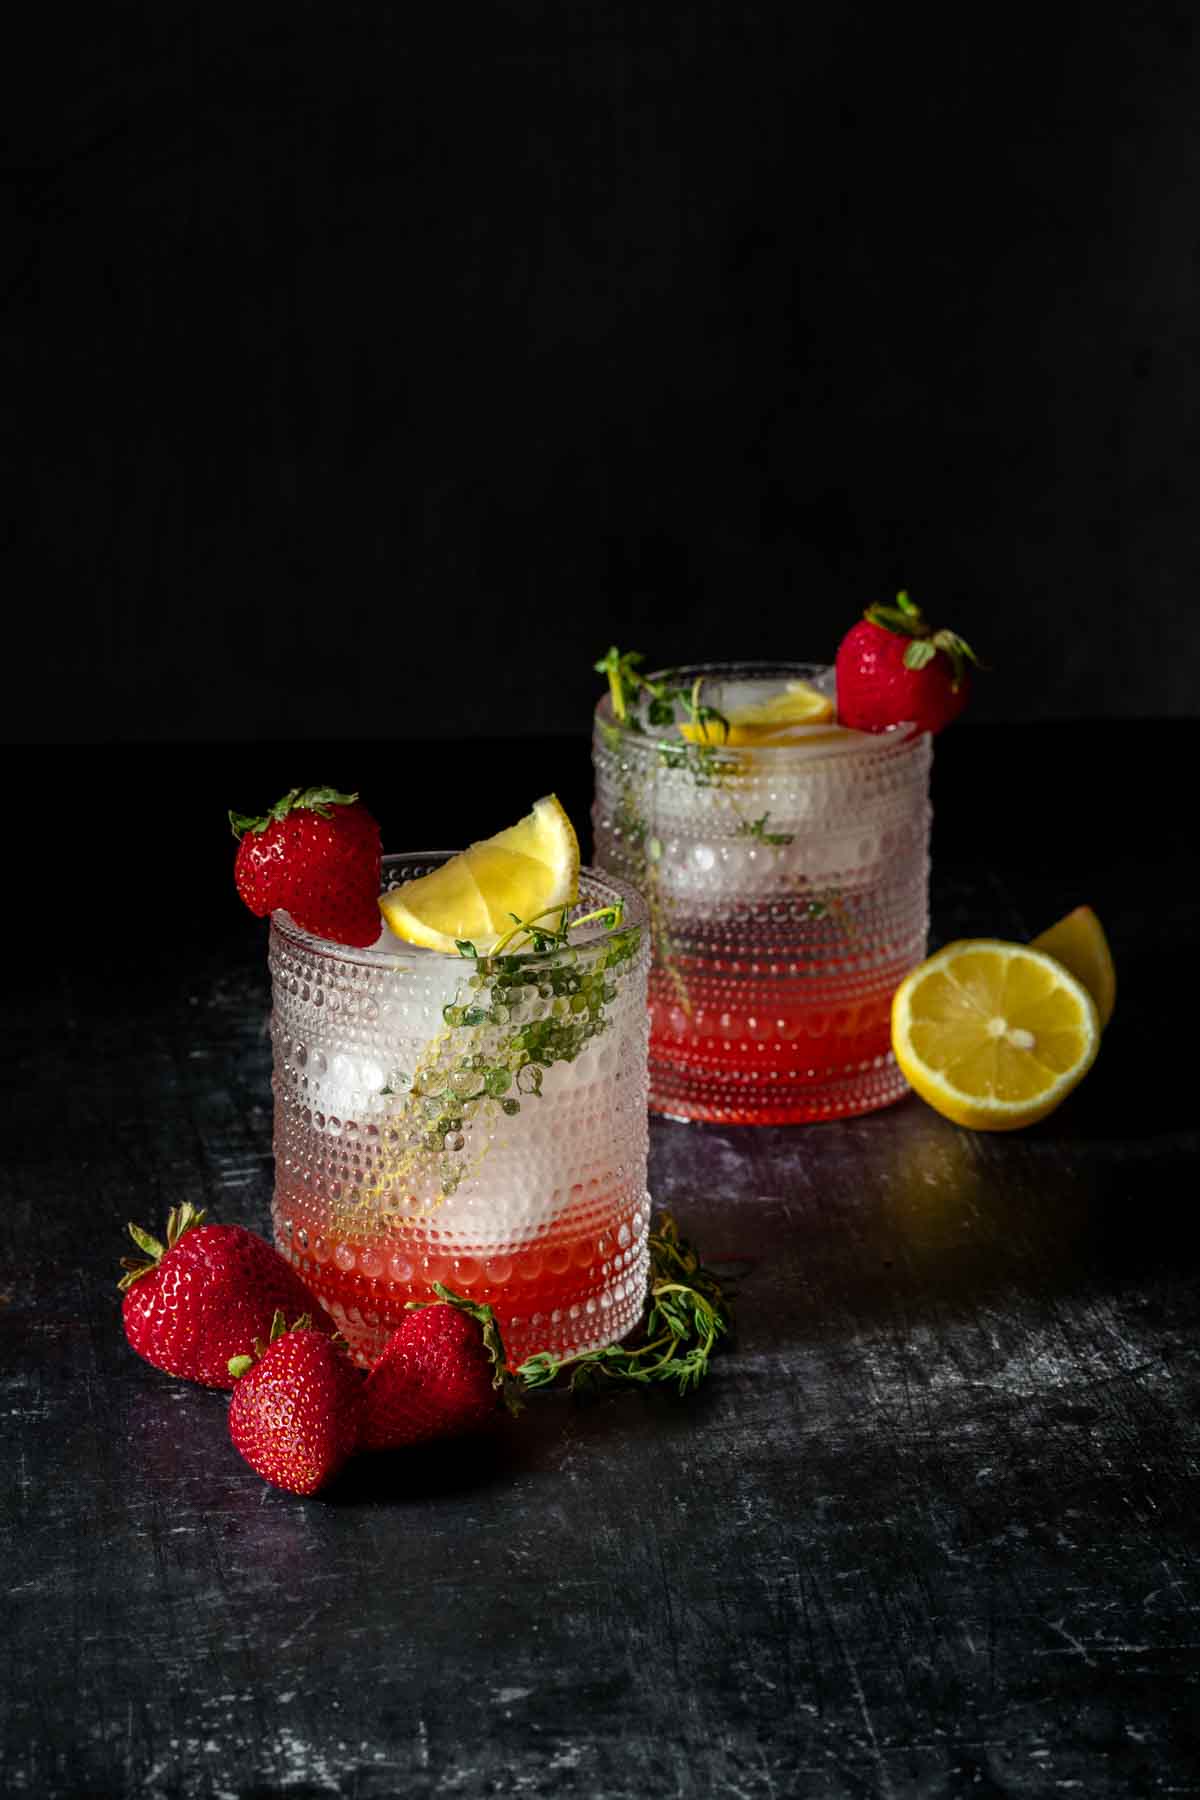 Two cocktail glasses with dots on them filled with a red liquid and ice and topped with lemon and thyme with a strawberry on the rim.